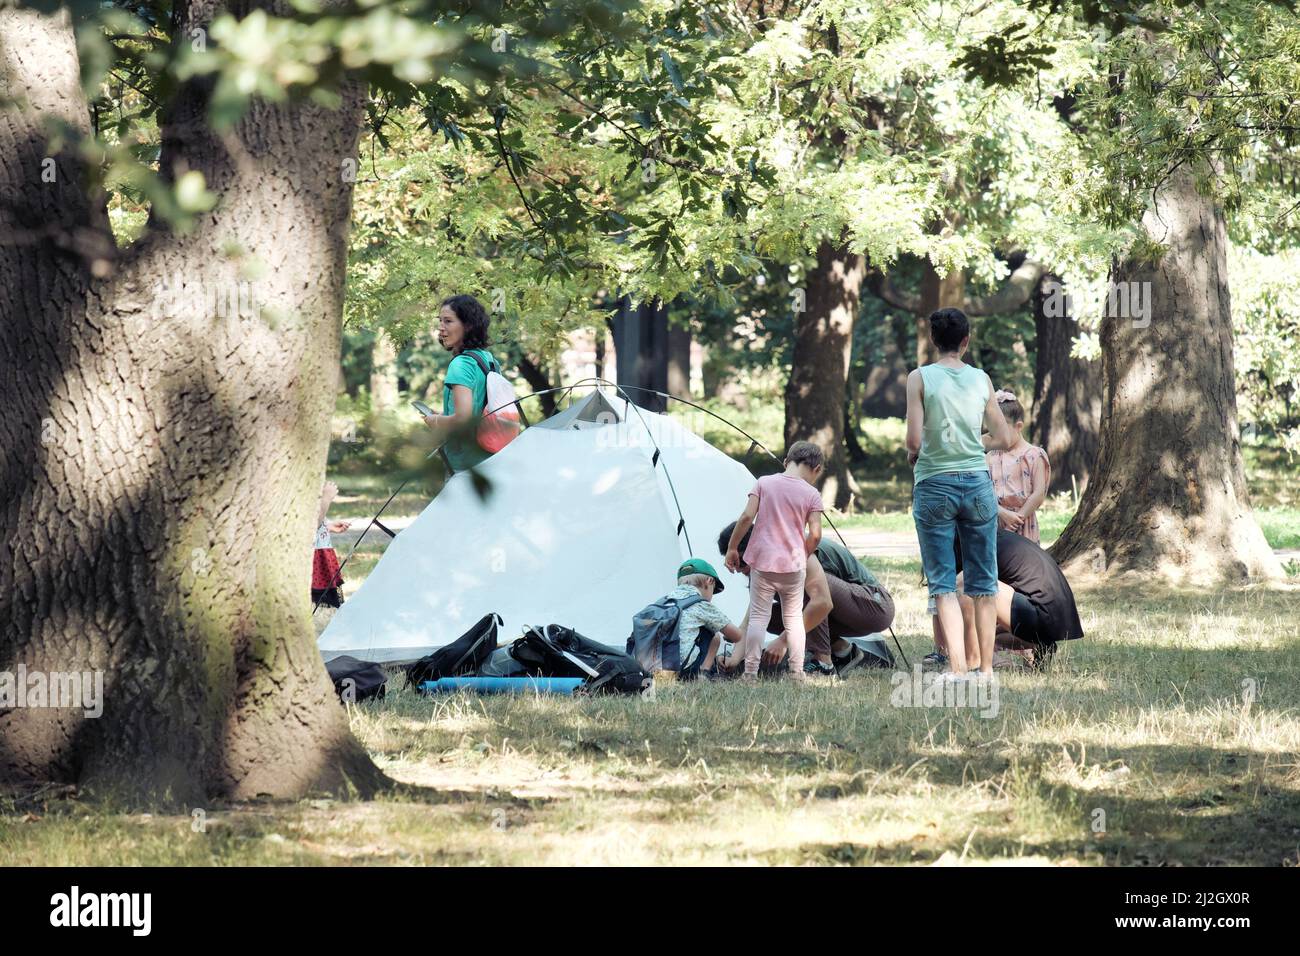 SOFIA, BULGARIA - AUGUST 04, 2017: women teaching to children how to pitch a tent in a Sofia Park Stock Photo